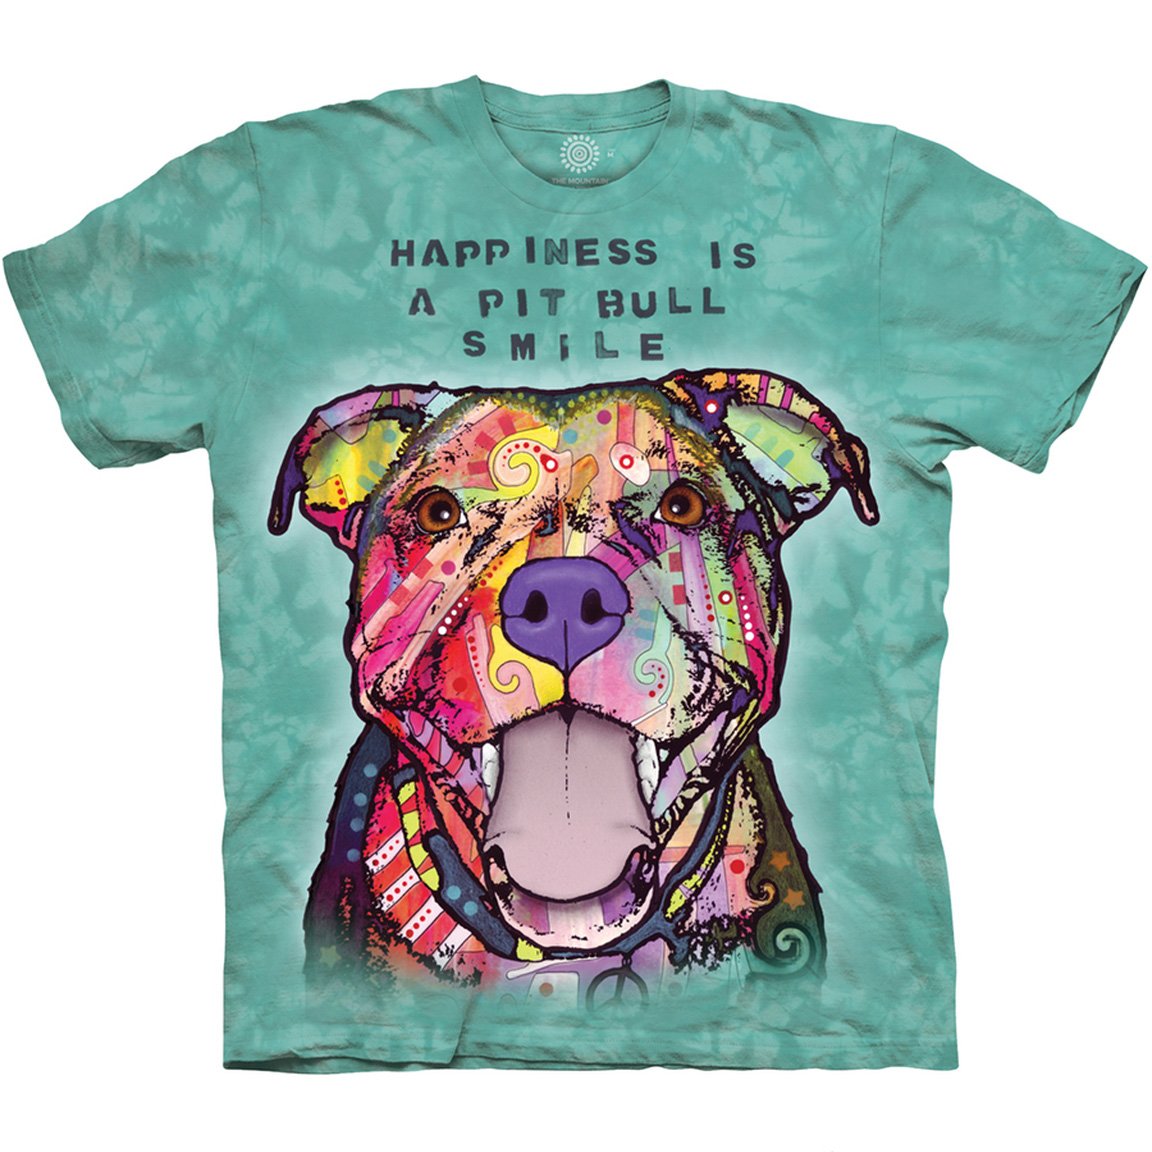 The Mountain Pit Bull Smile - T-Shirt